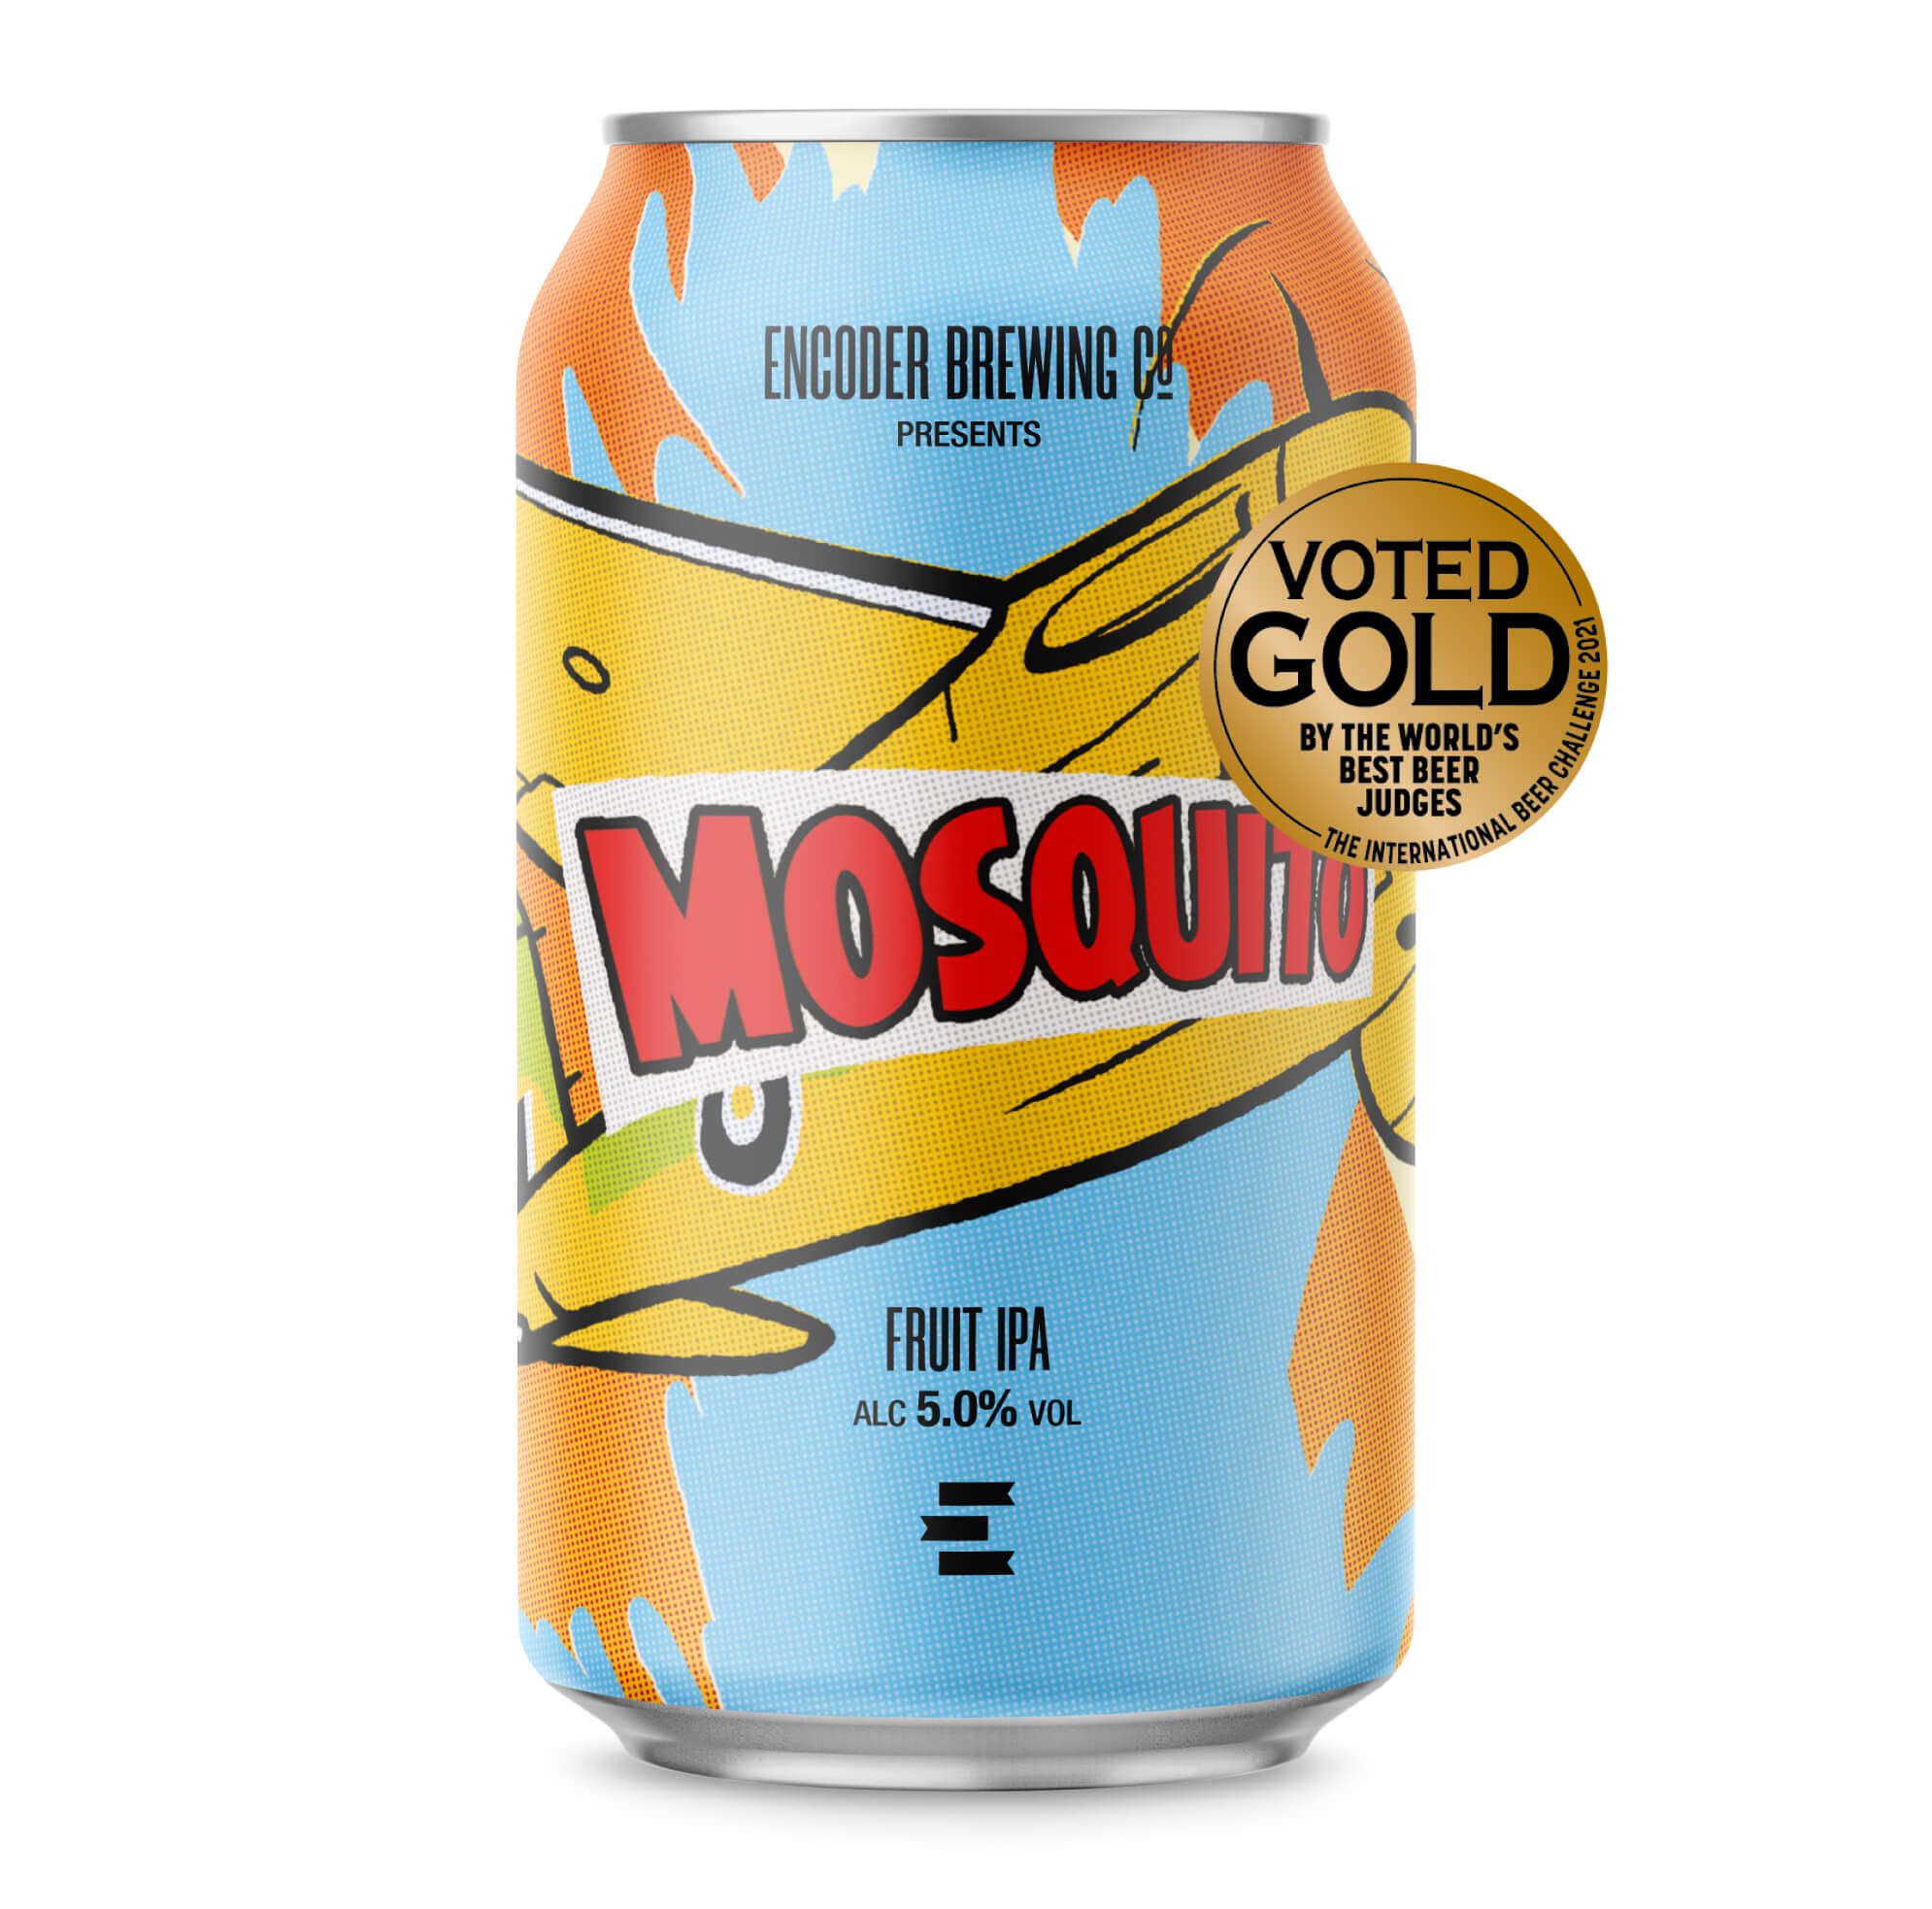 Encoder Brewing Co - Mosquito Dimmig IPA